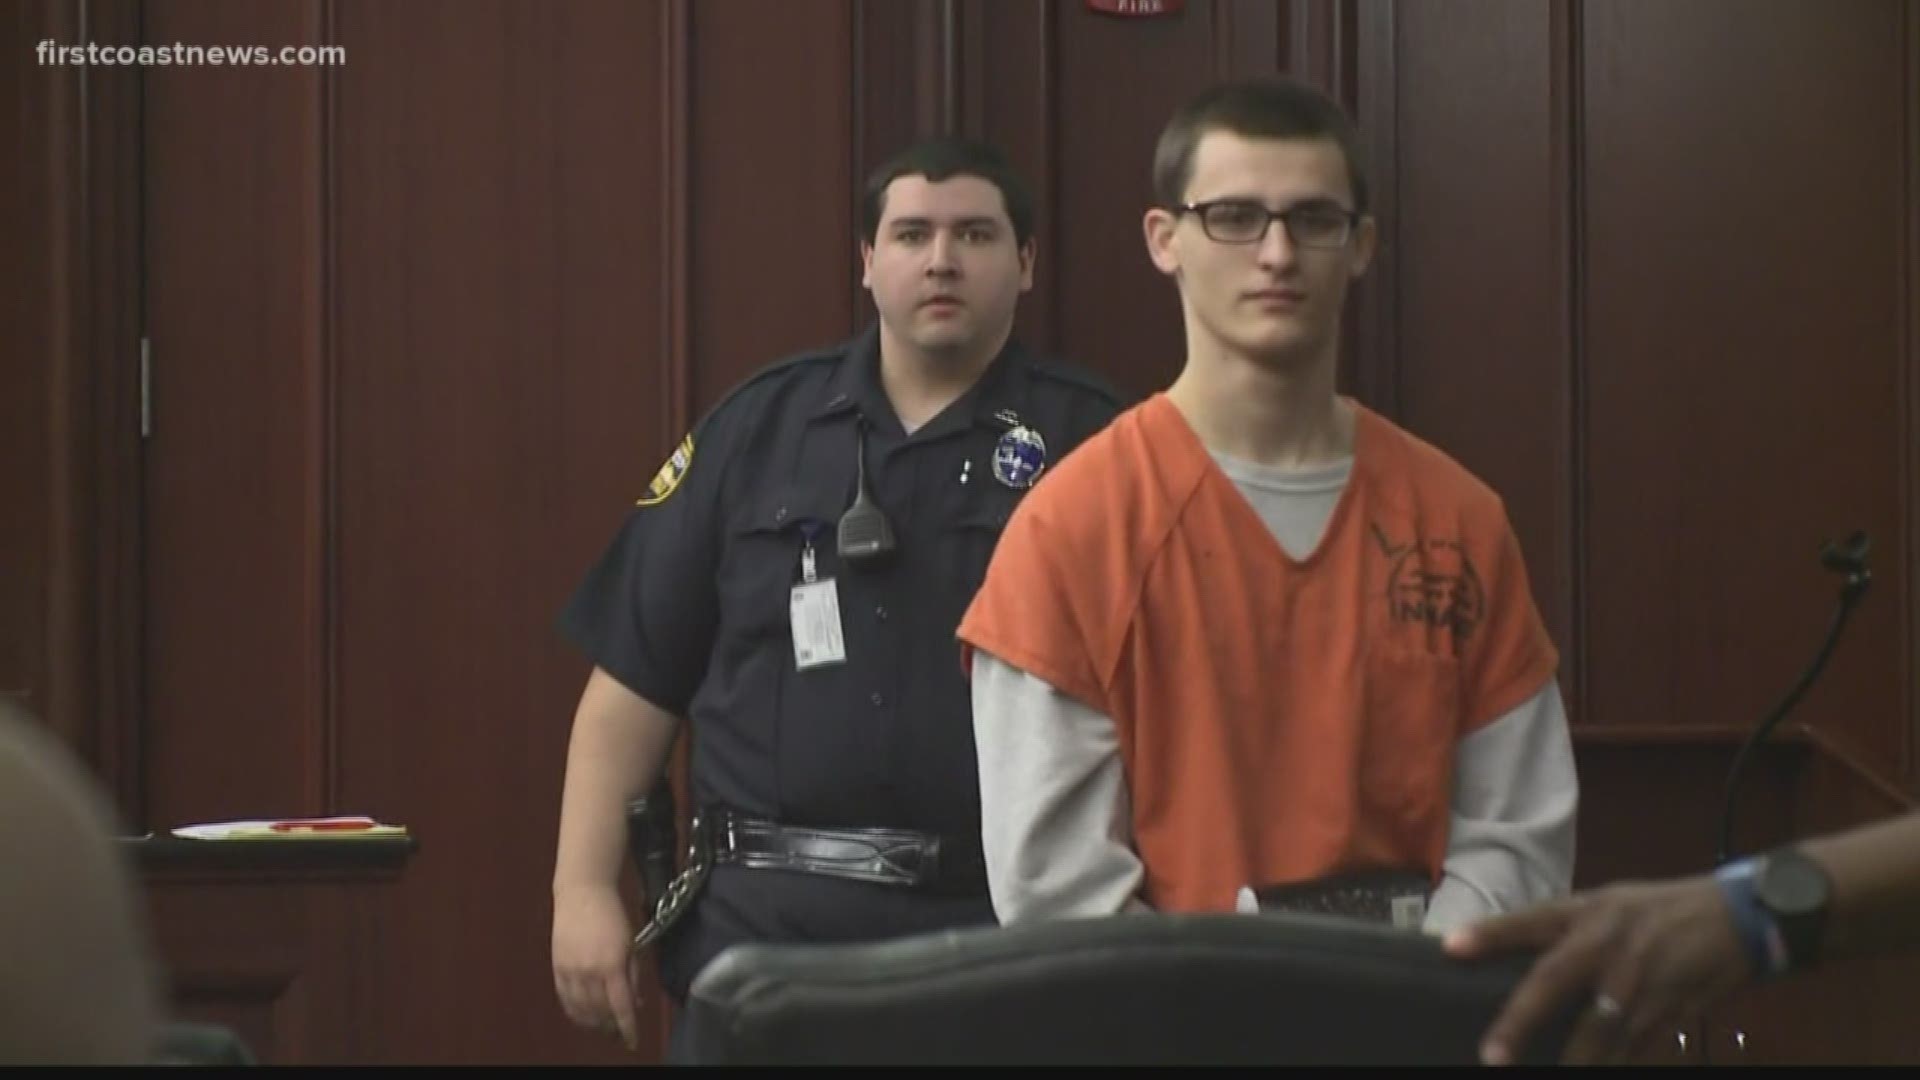 A sentencing hearing for the teenager accused of murdering his grandmother and burying her body in a shallow grave began Wednesday. It will continue on Thursday.